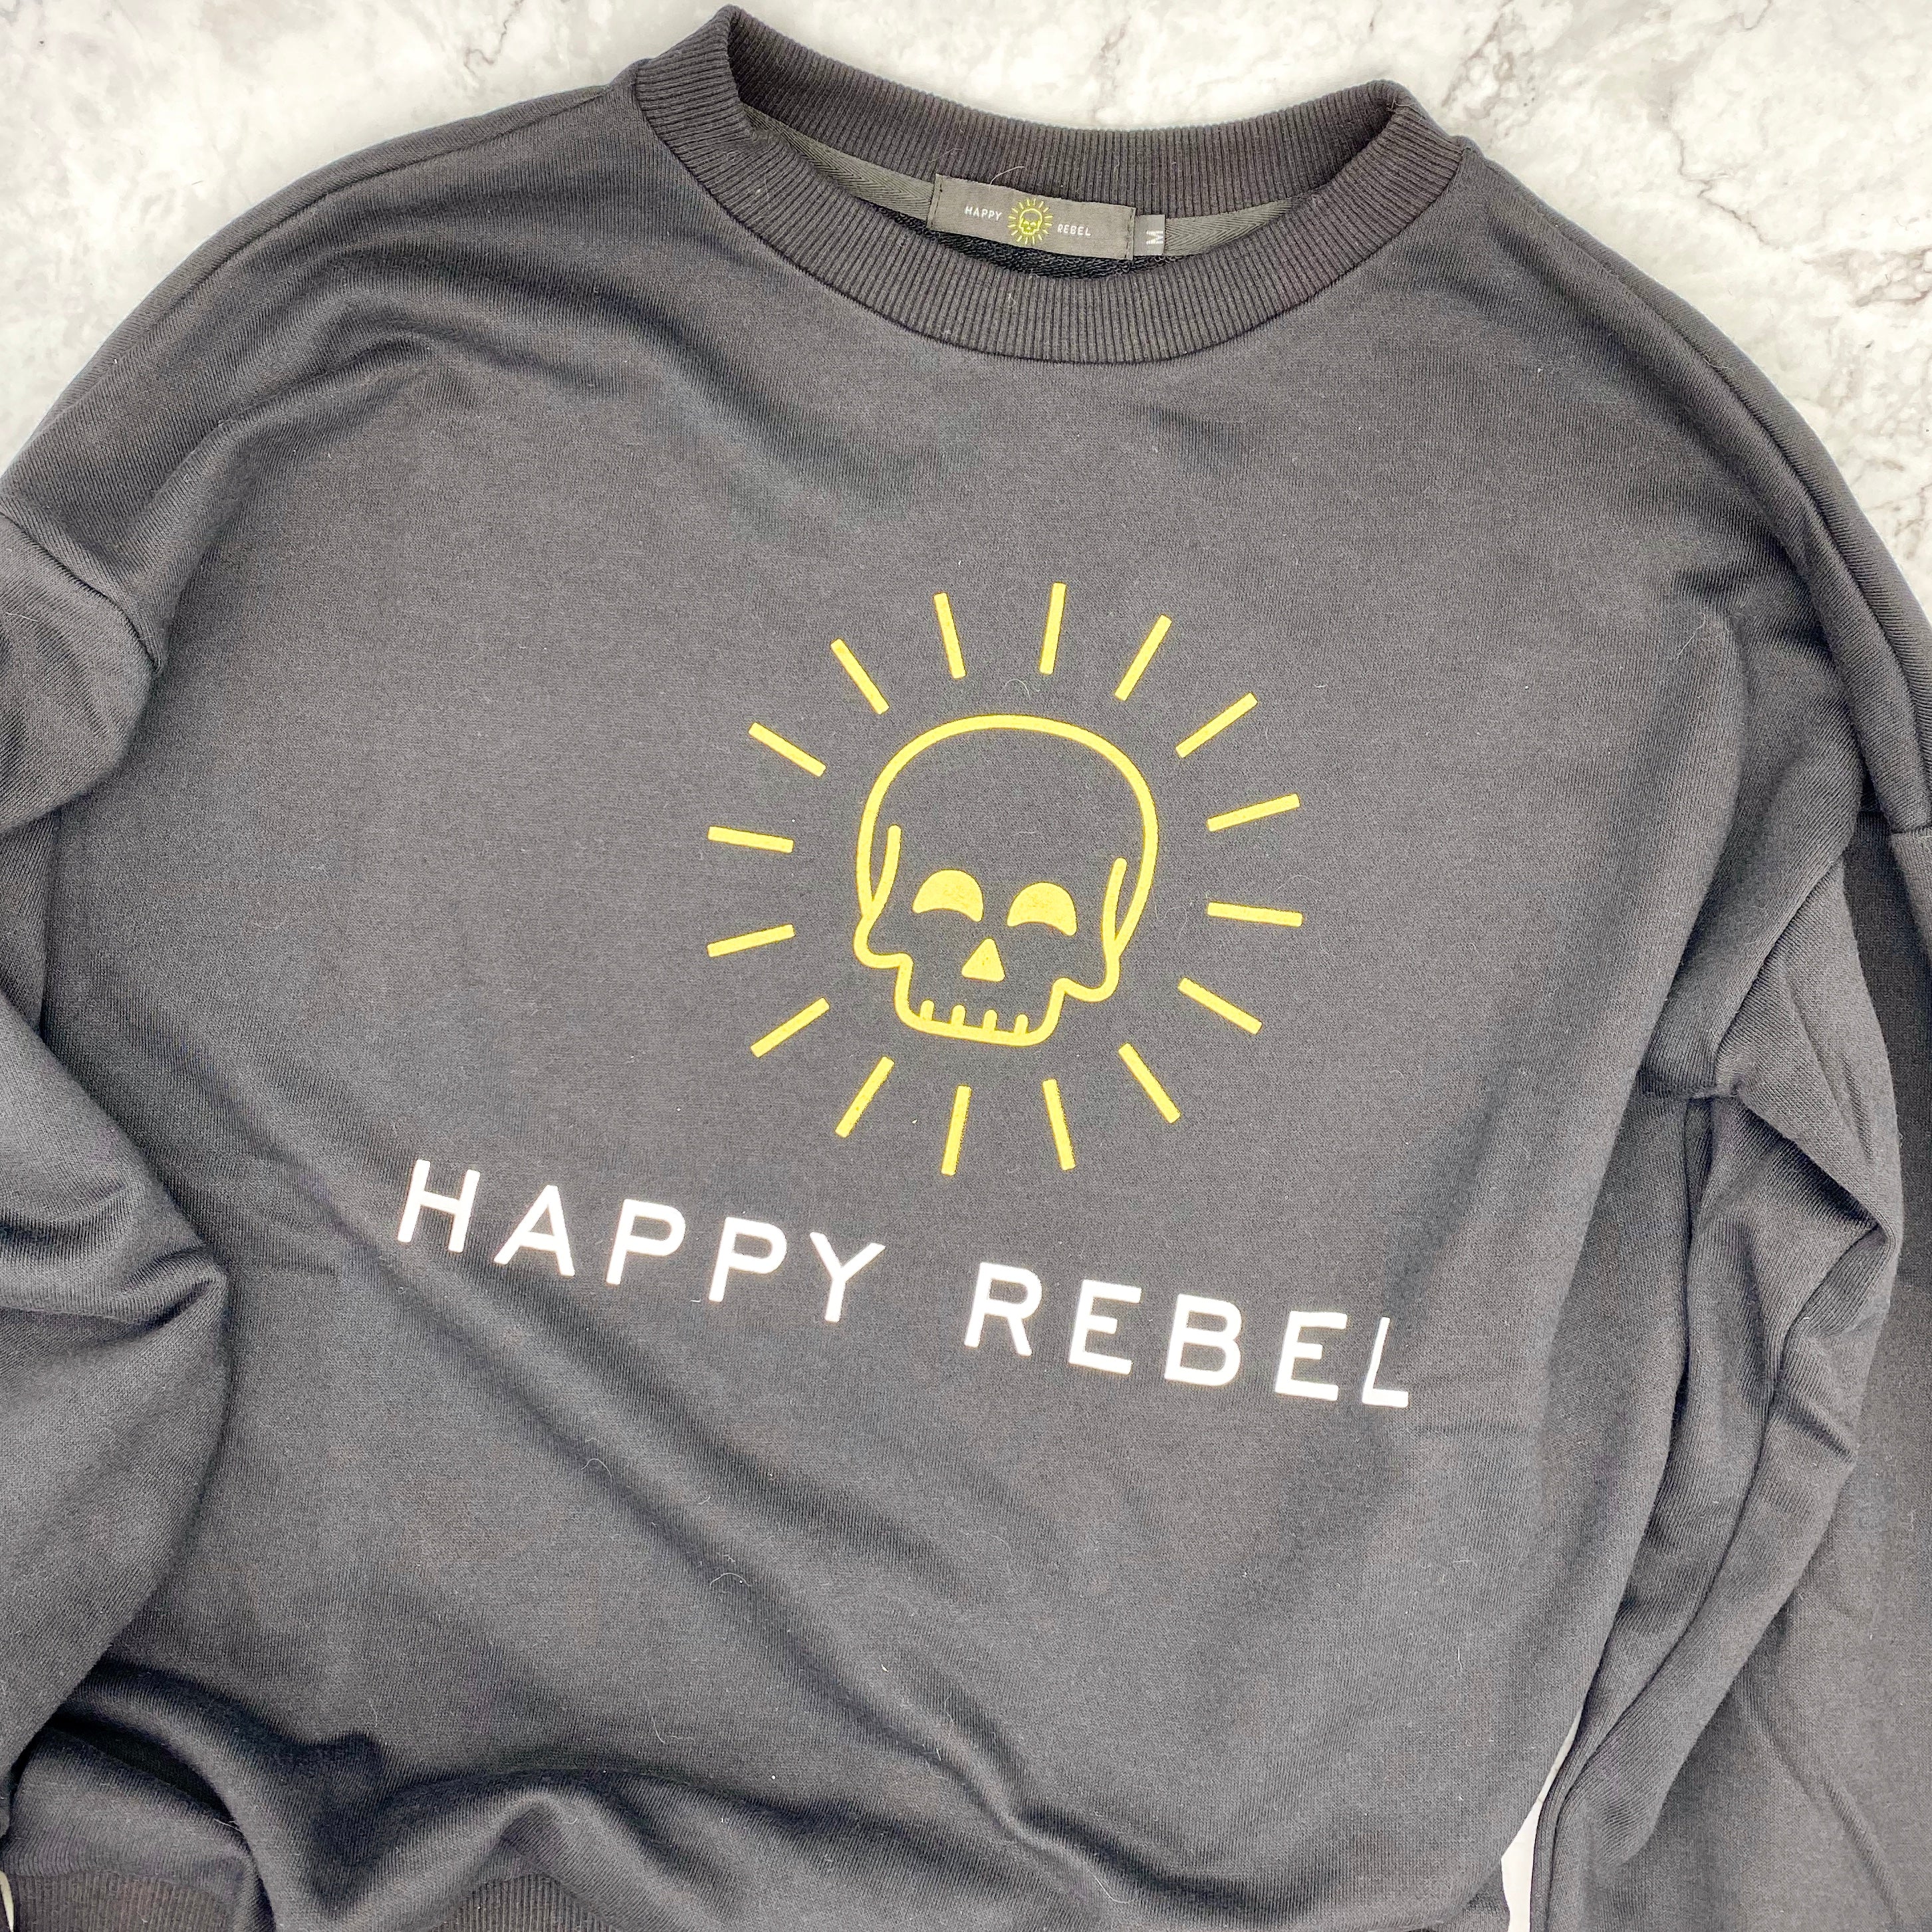 Gifts of A Happy Rebel